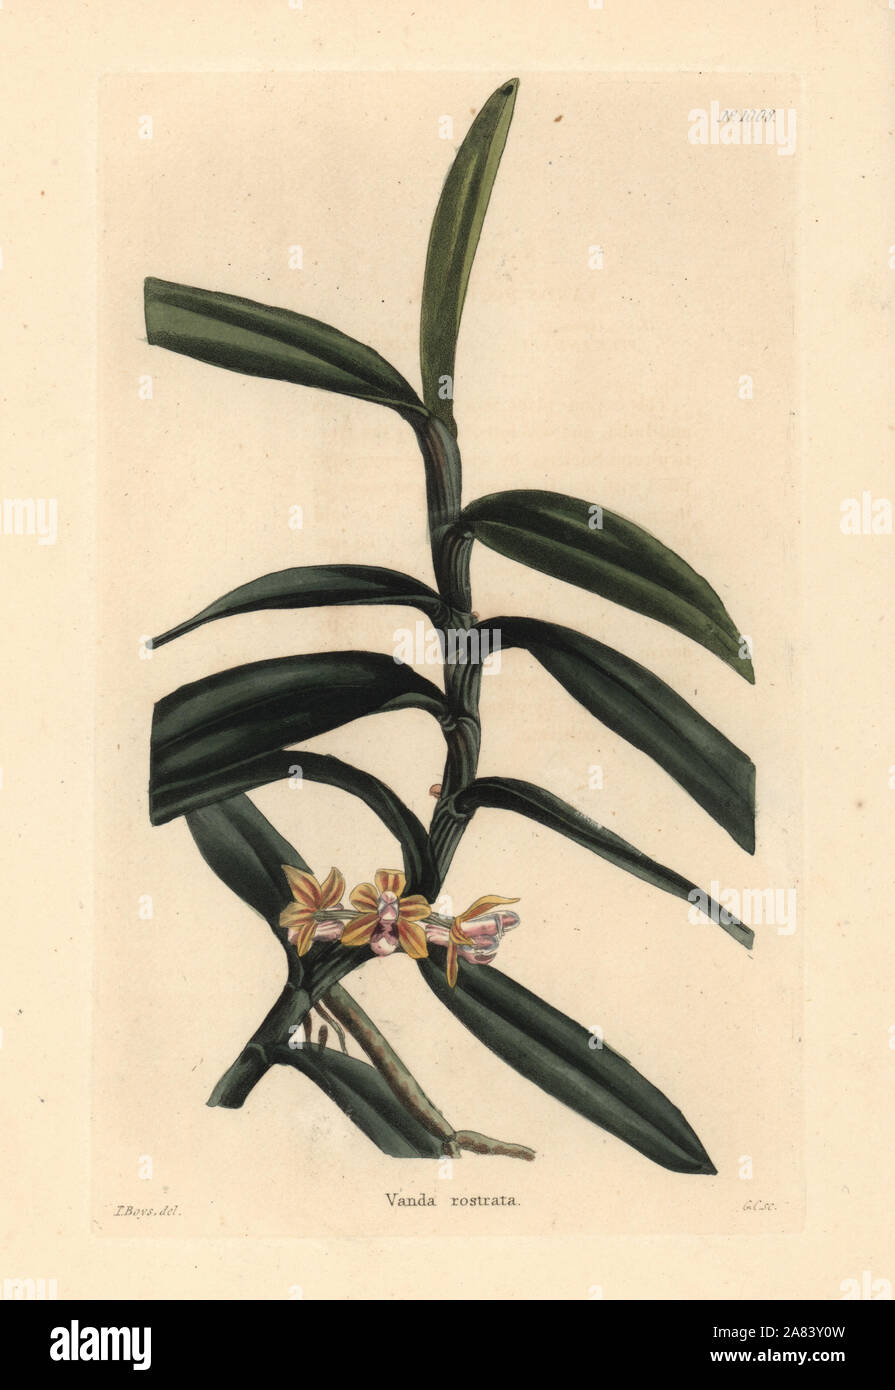 Cleisostoma rostratum orchid (Vanda rostrata). Handcoloured copperplate engraving by George Cooke after Thomas Shotter Boys from Conrad Loddiges' Botanical Cabinet, Hackney, 1825. Stock Photo